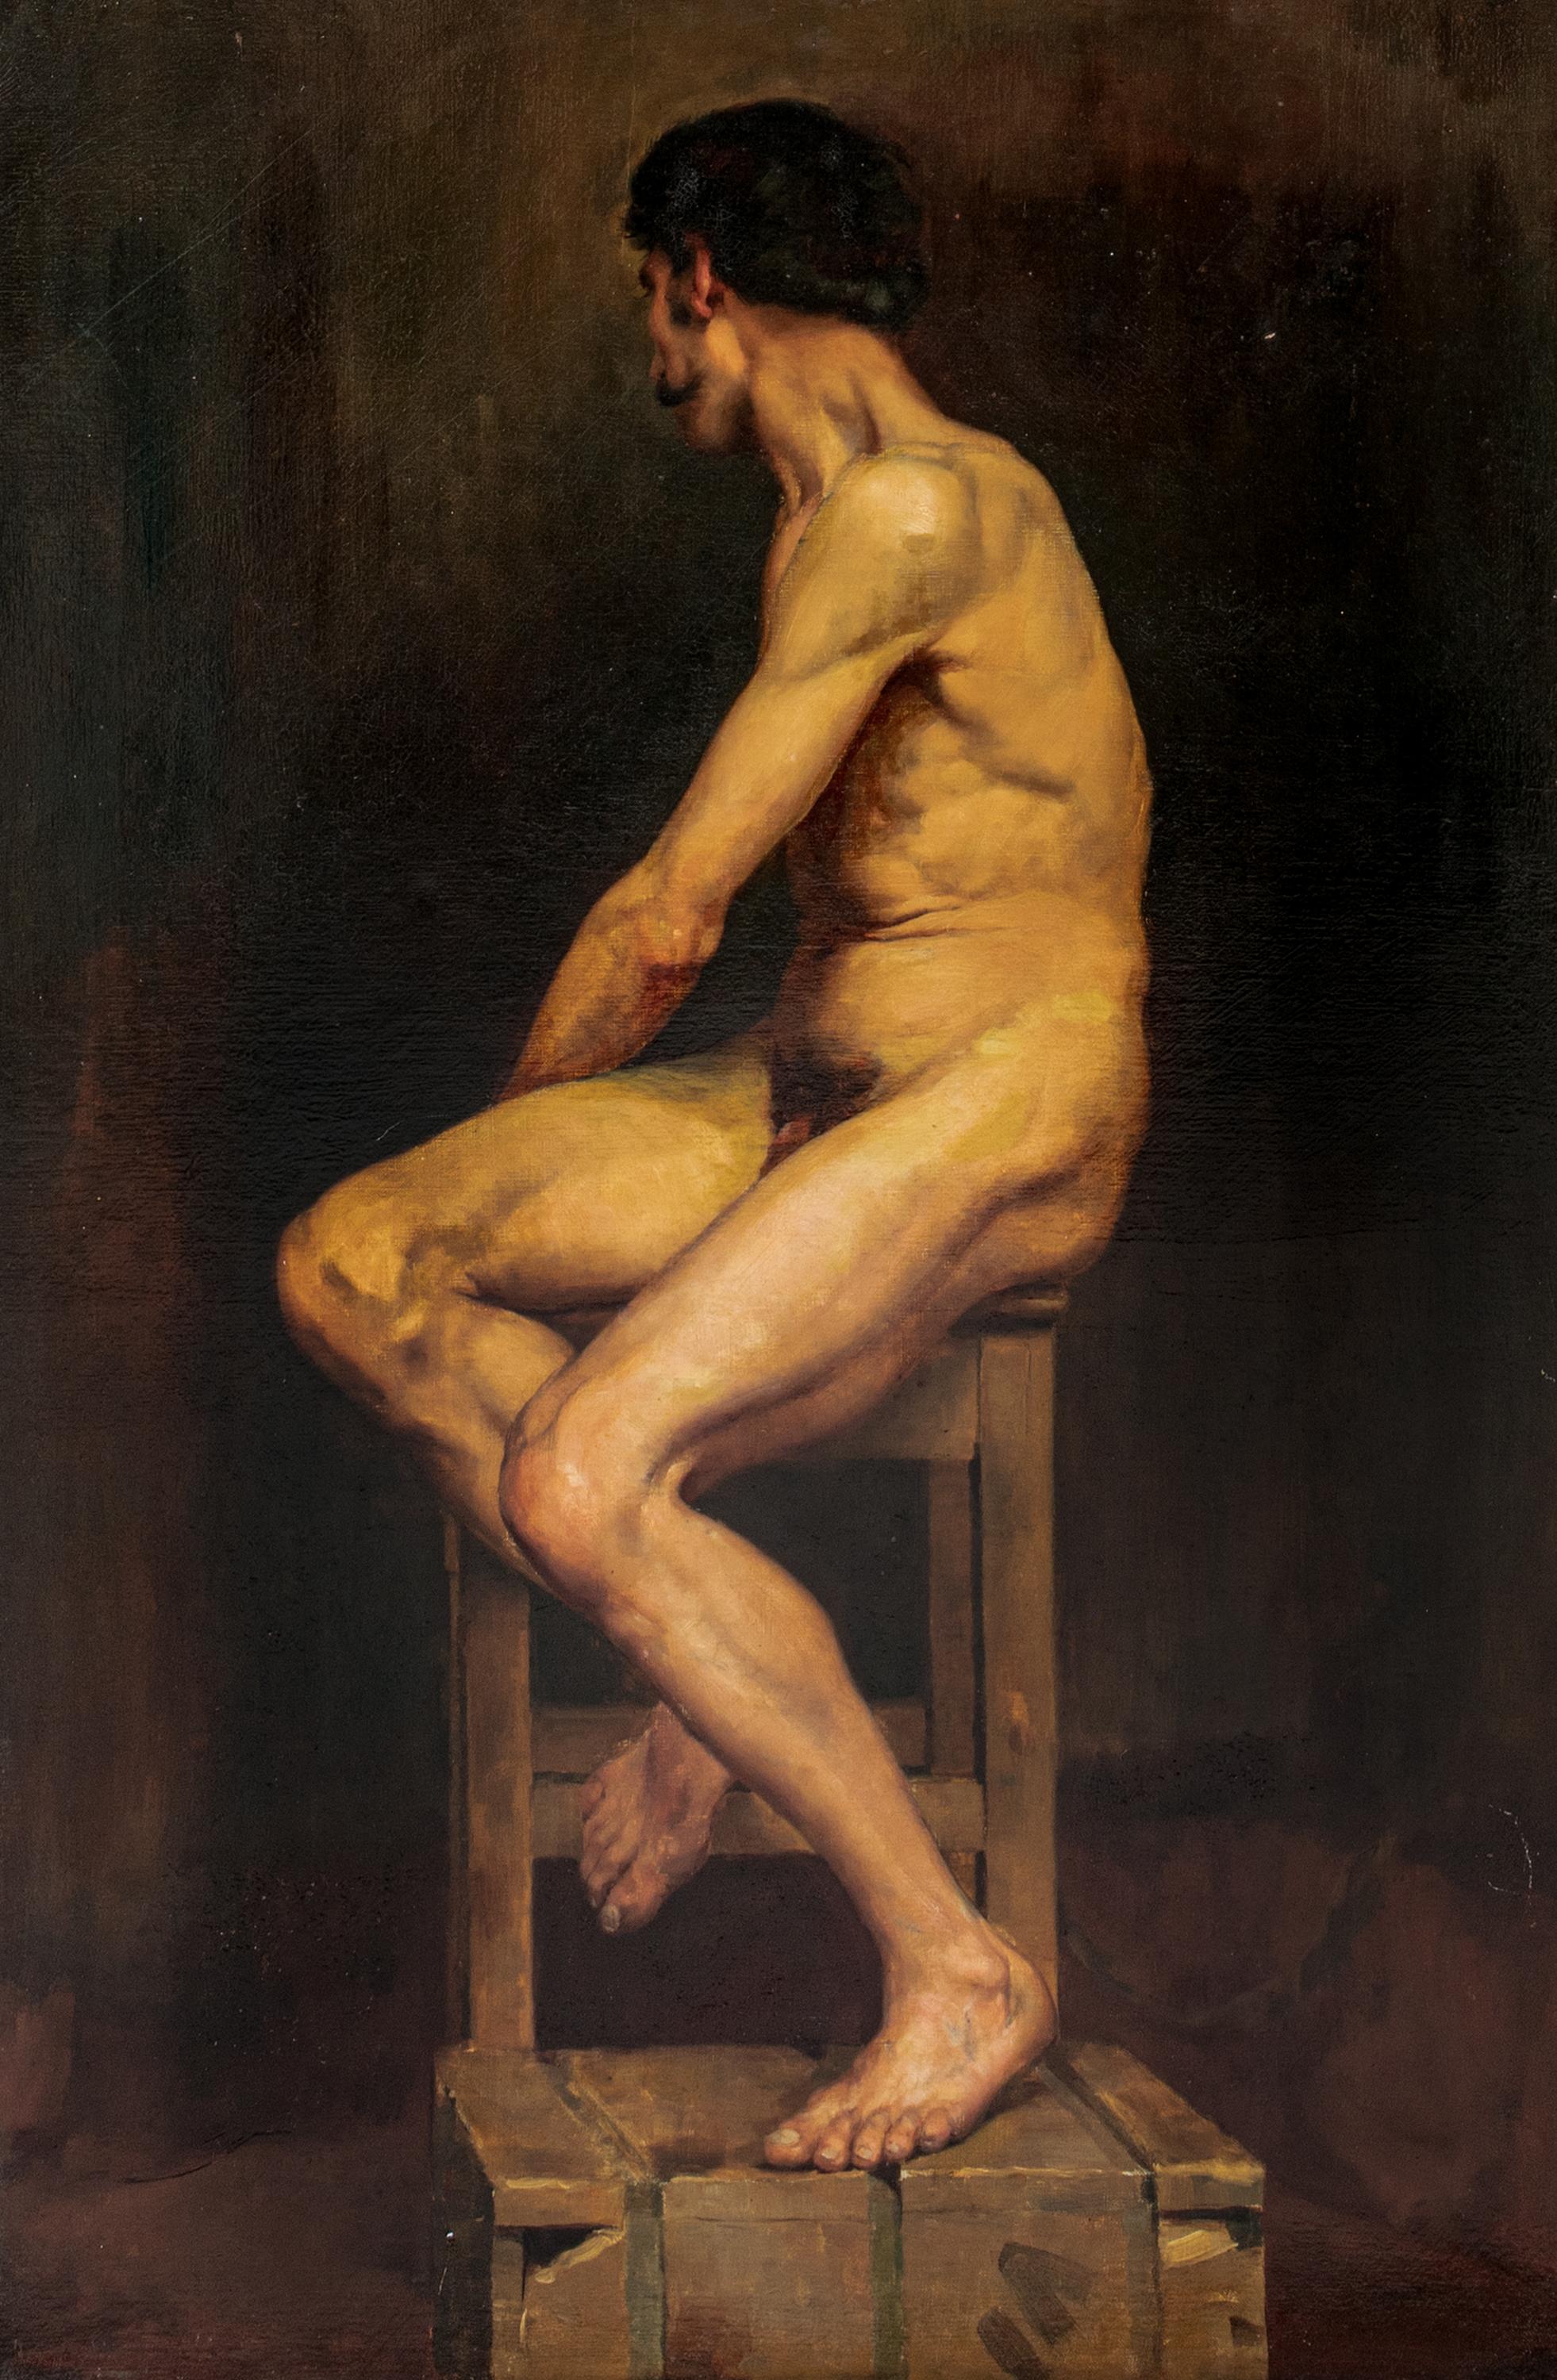 Studio Male Nude, 19th Century

Harold William Boutcher (1867-1903)

Large 19th Century Newlyn School portrait of a seated nude male, oil on canvas by Harold William Boutcher. Excellent quality and condition full length nude studio portrait.